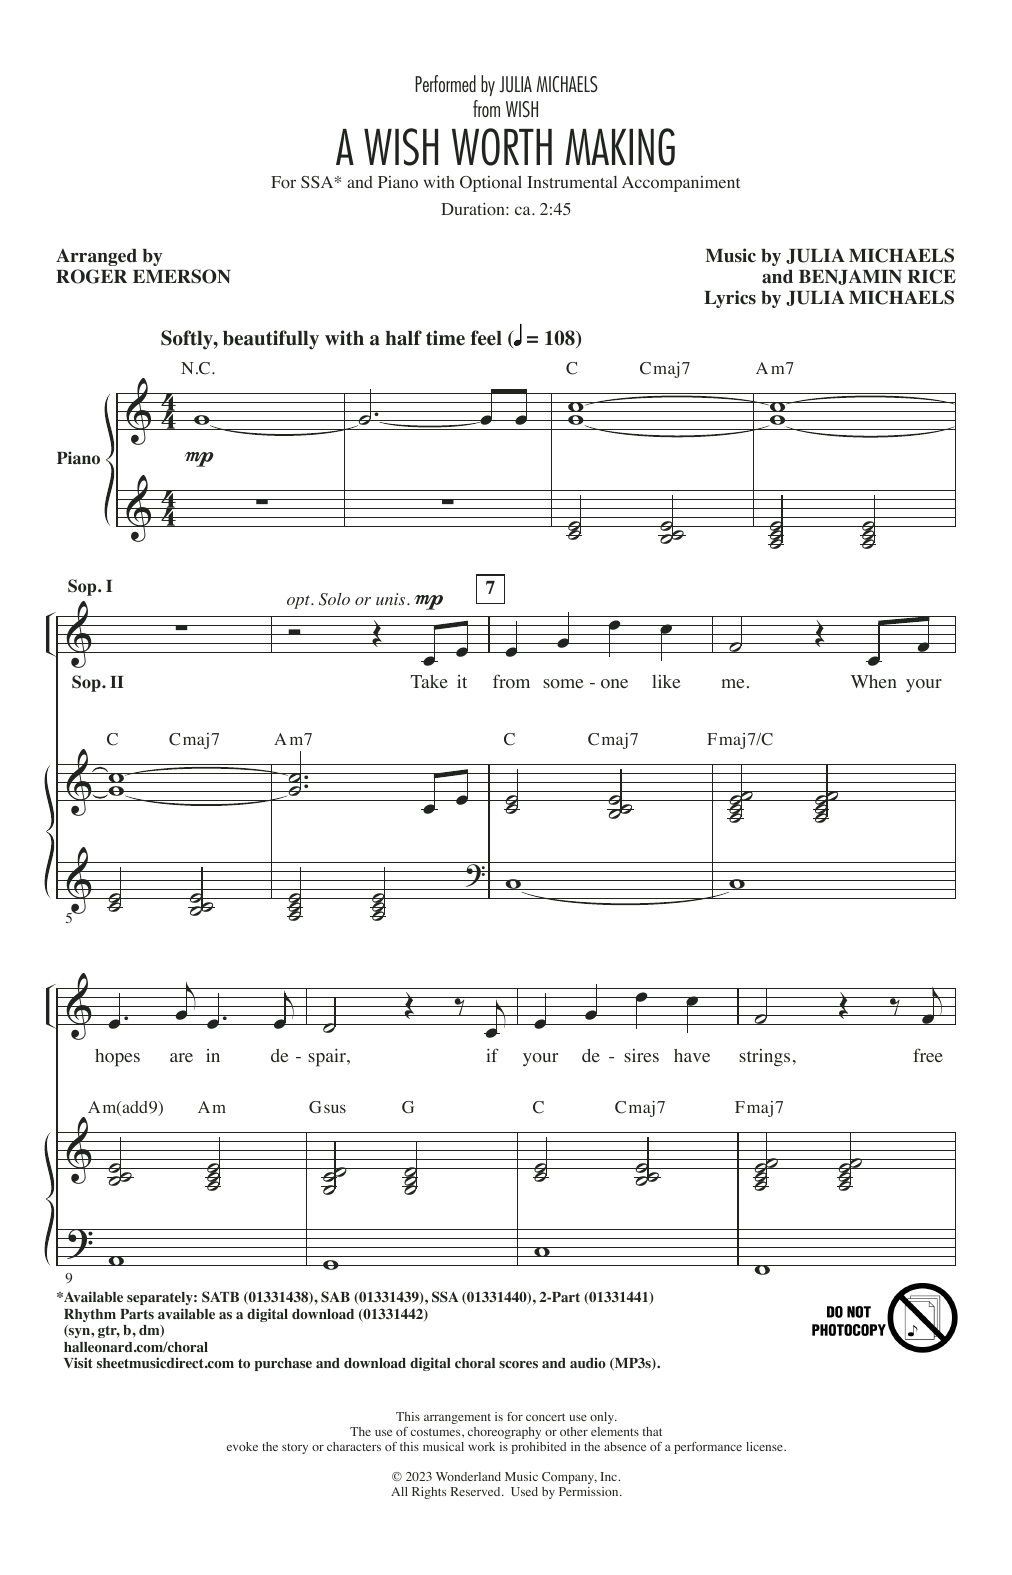 Julia Michaels A Wish Worth Making (from Wish) (arr. Roger Emerson) sheet music notes printable PDF score